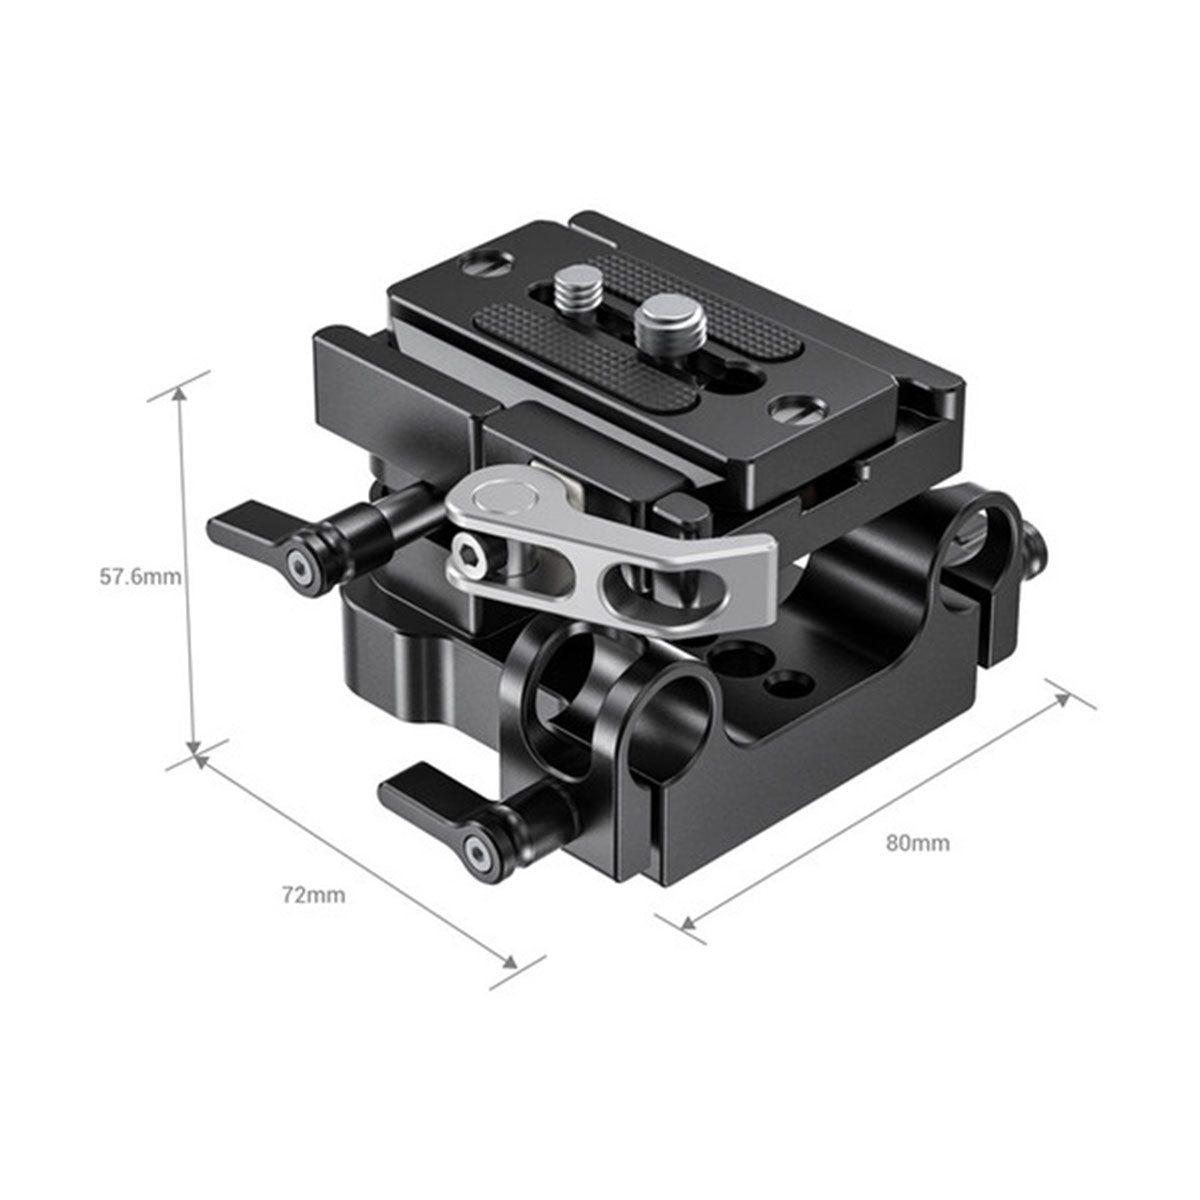 SmallRig Universal 15mm Rail Support System with Quick Release Plate